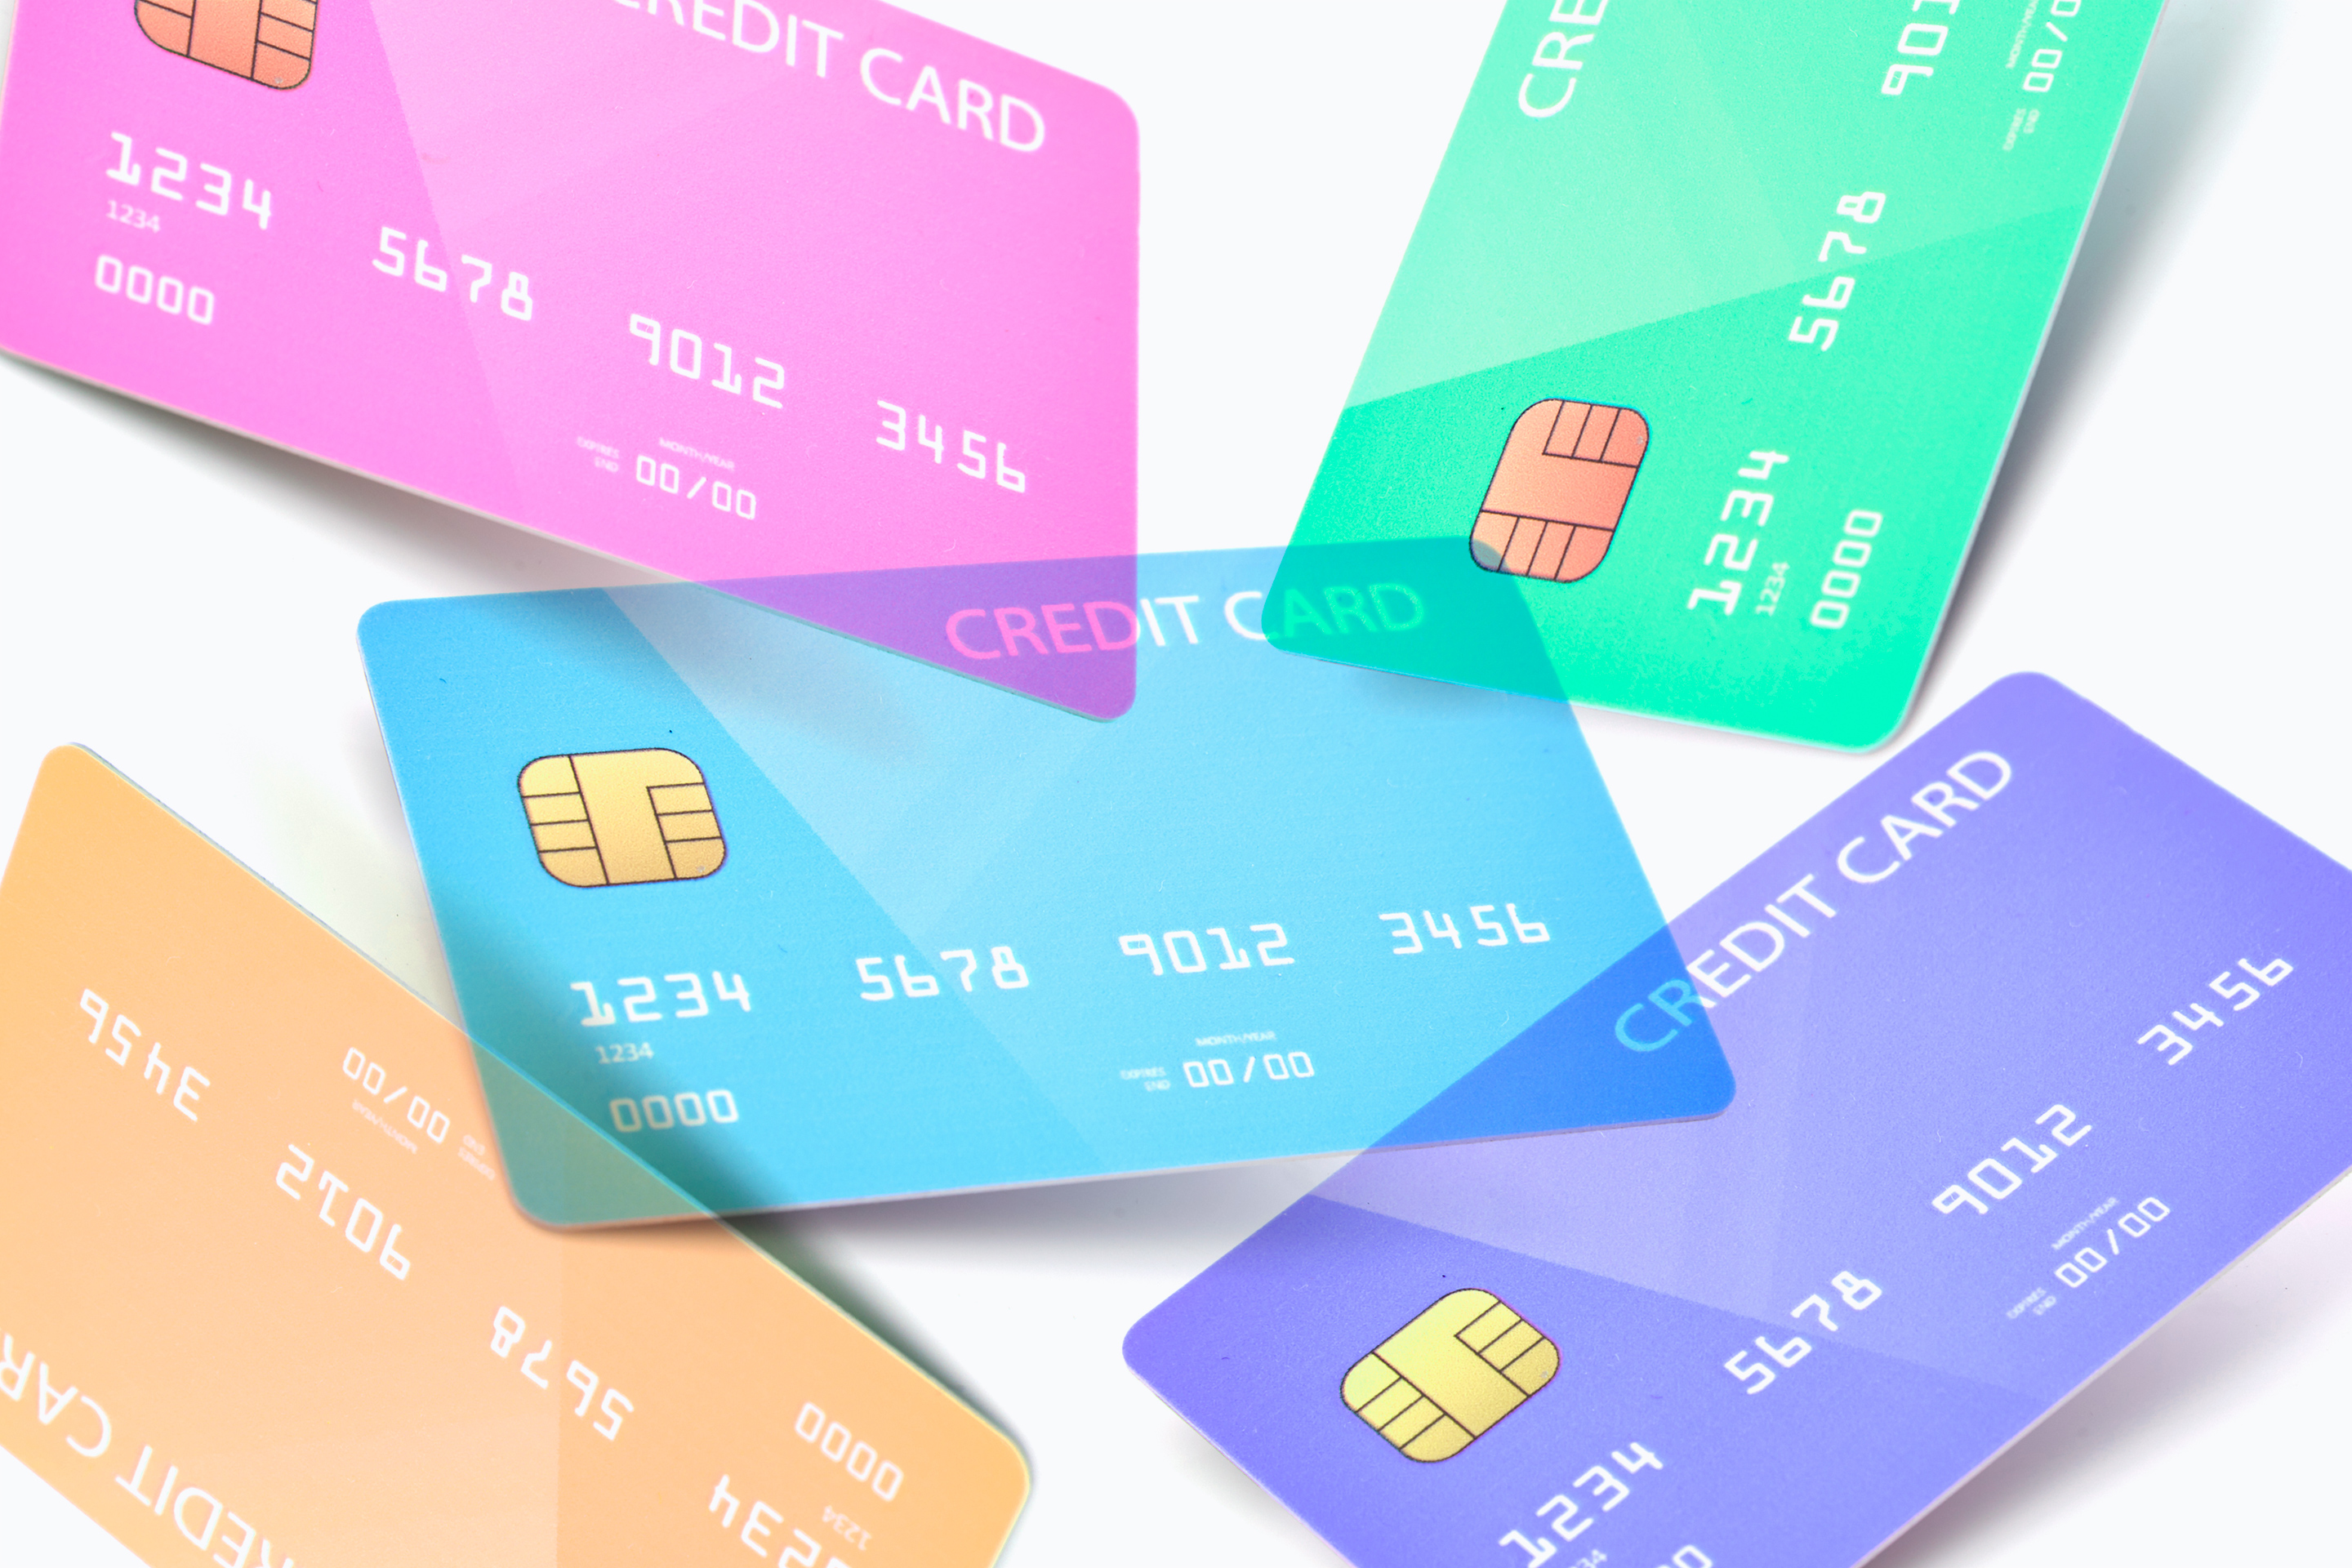 Credit Card Welcome Offers Disappeared for Months. Now, Bonus Deals Are Back in a Big Way